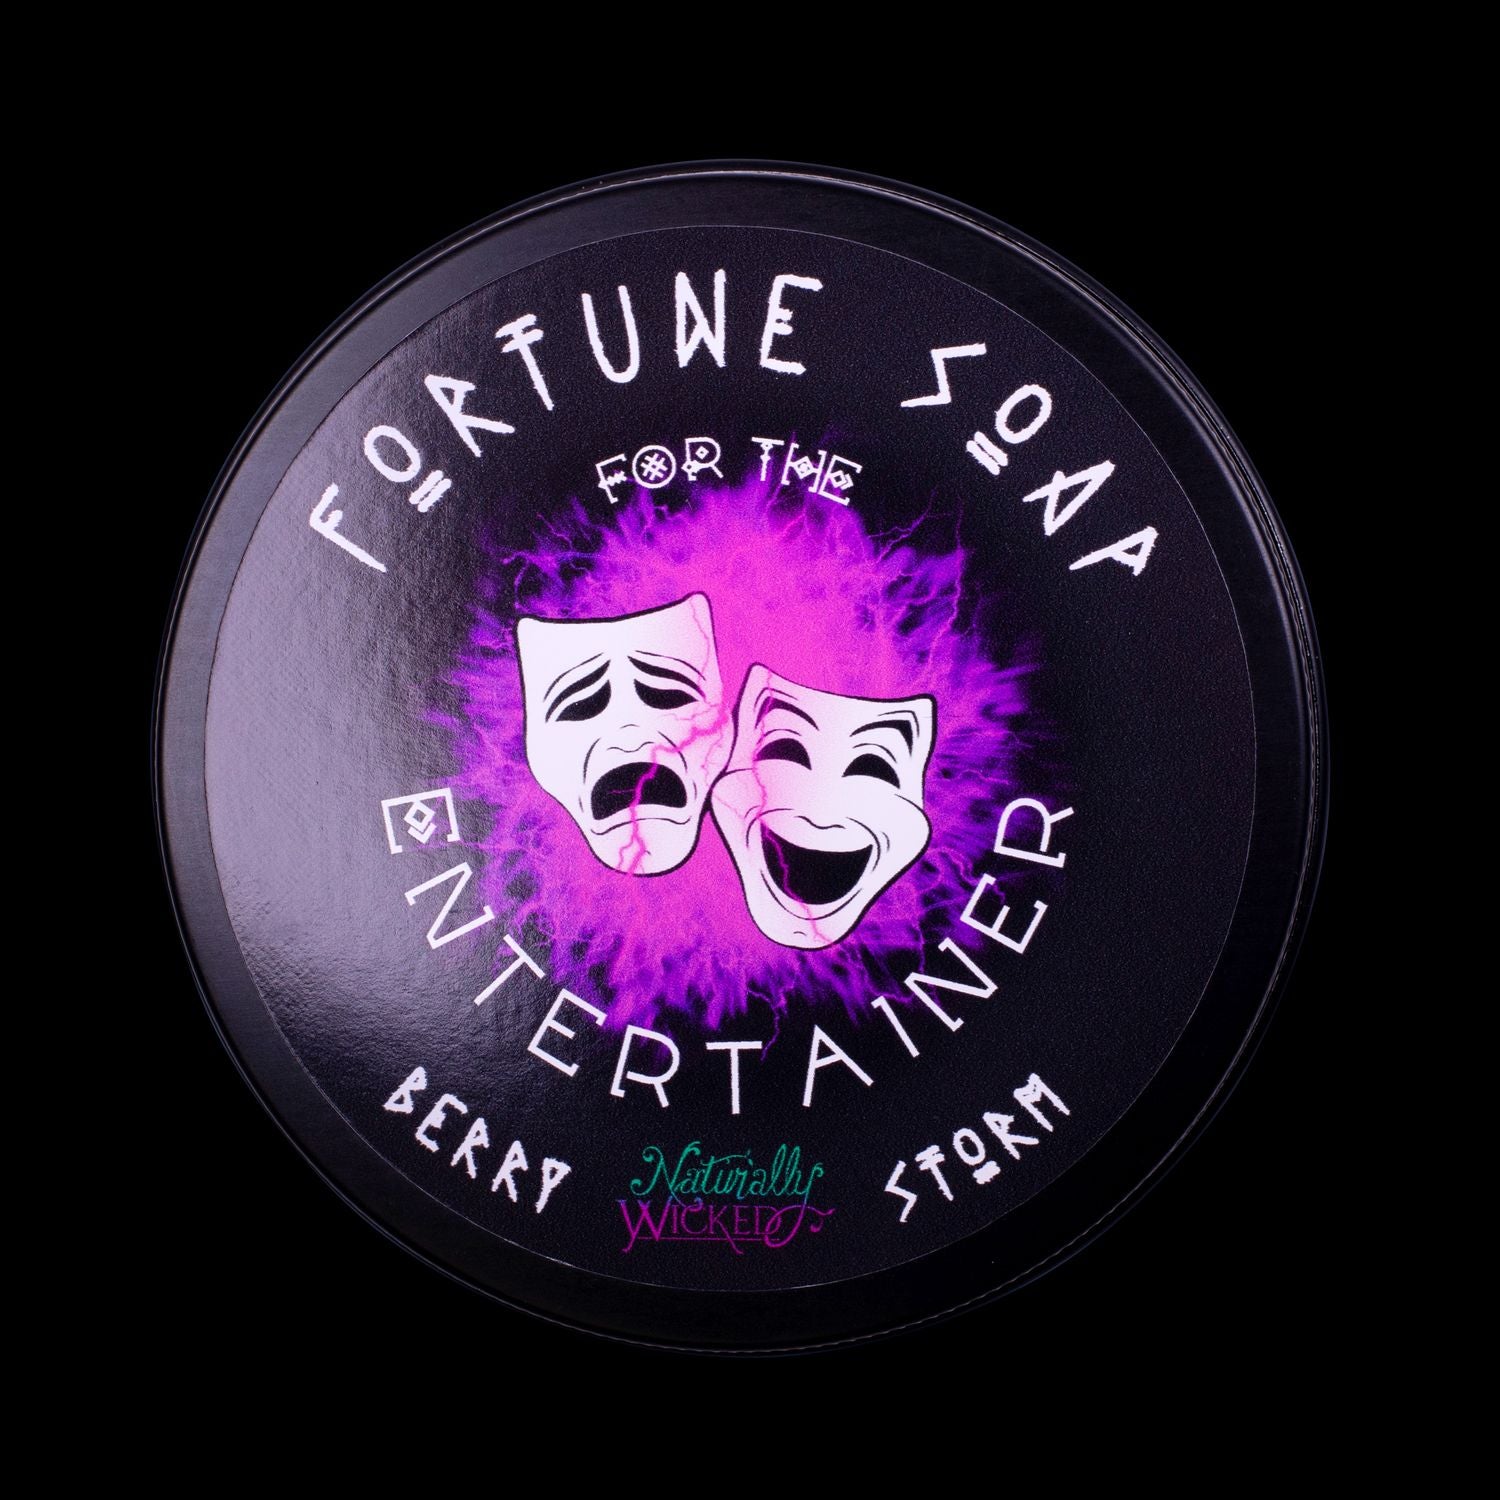 Naturally Wicked Fortune Soap For The Entertainer. Purple Plant-based Soap With Amethyst Rune Crystal, Scented With Berry Storm All Situated In A Black Glossy Gift Tin.